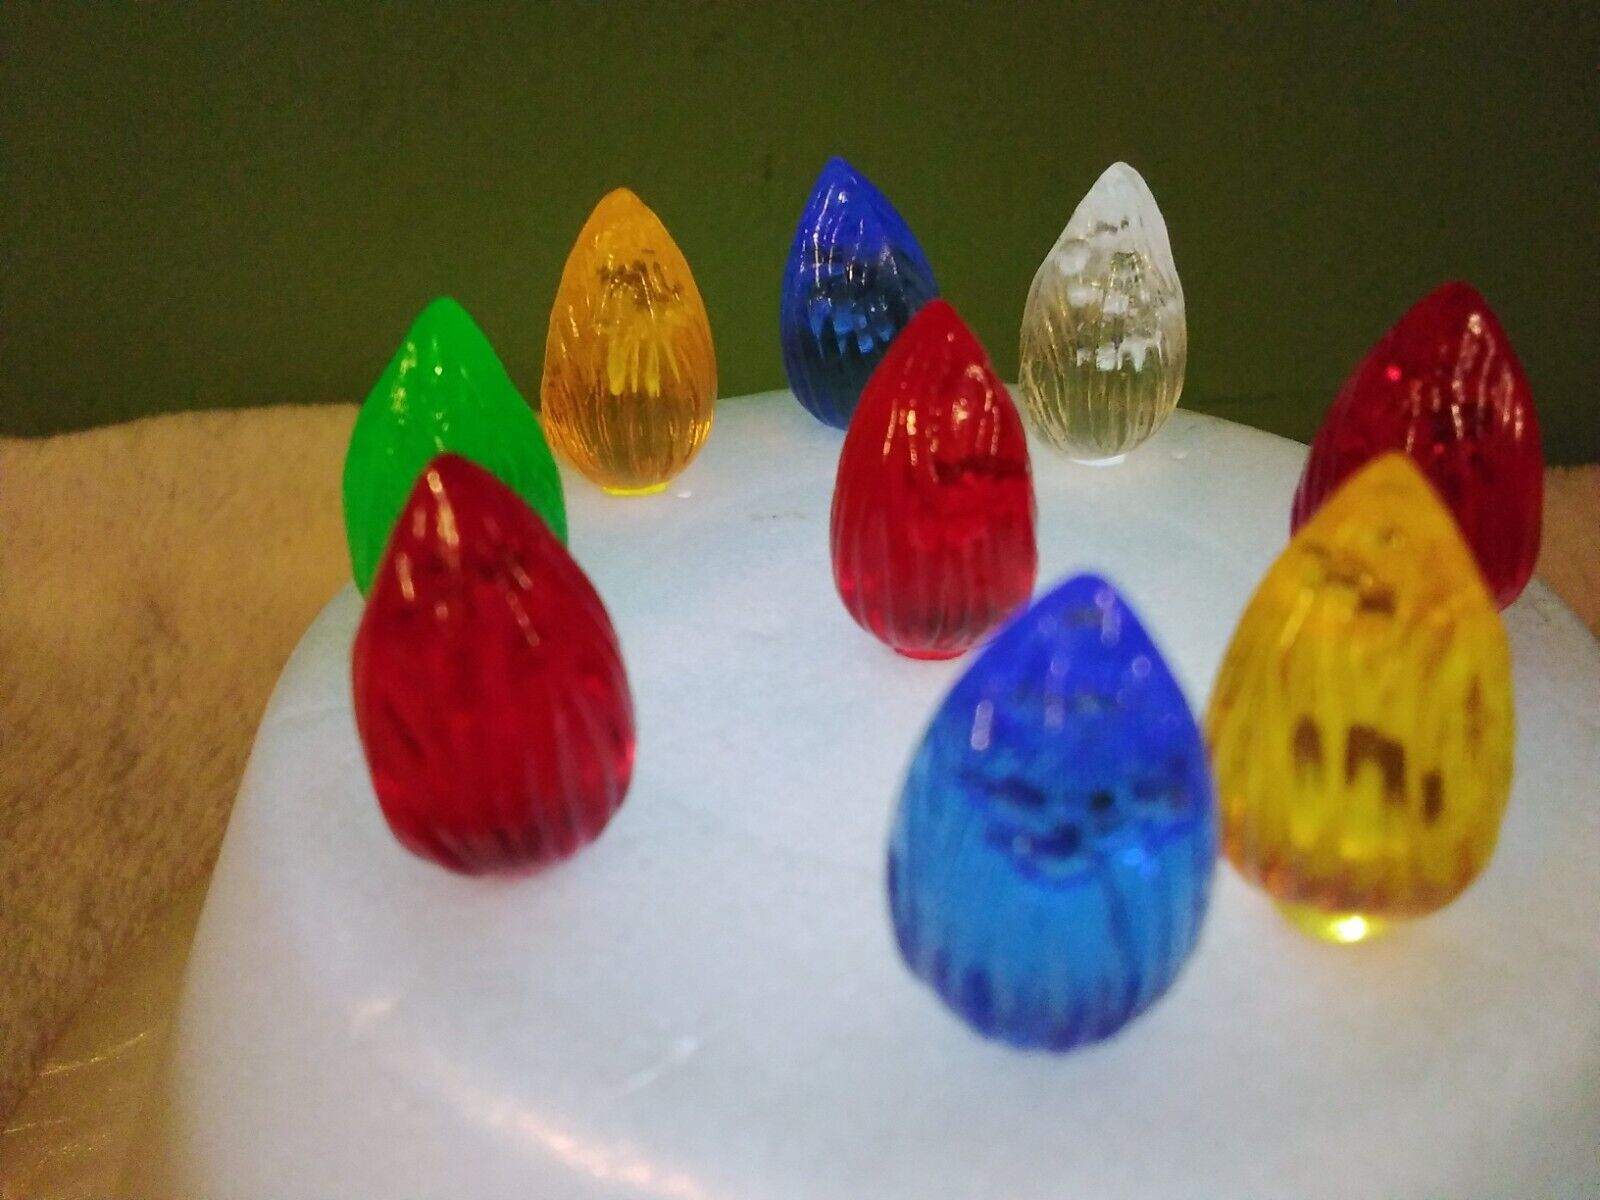 15 ASSORTED VINTAGE LARGE TWIST BULBS for Ceramic Christmas Tree *5 COLORS*